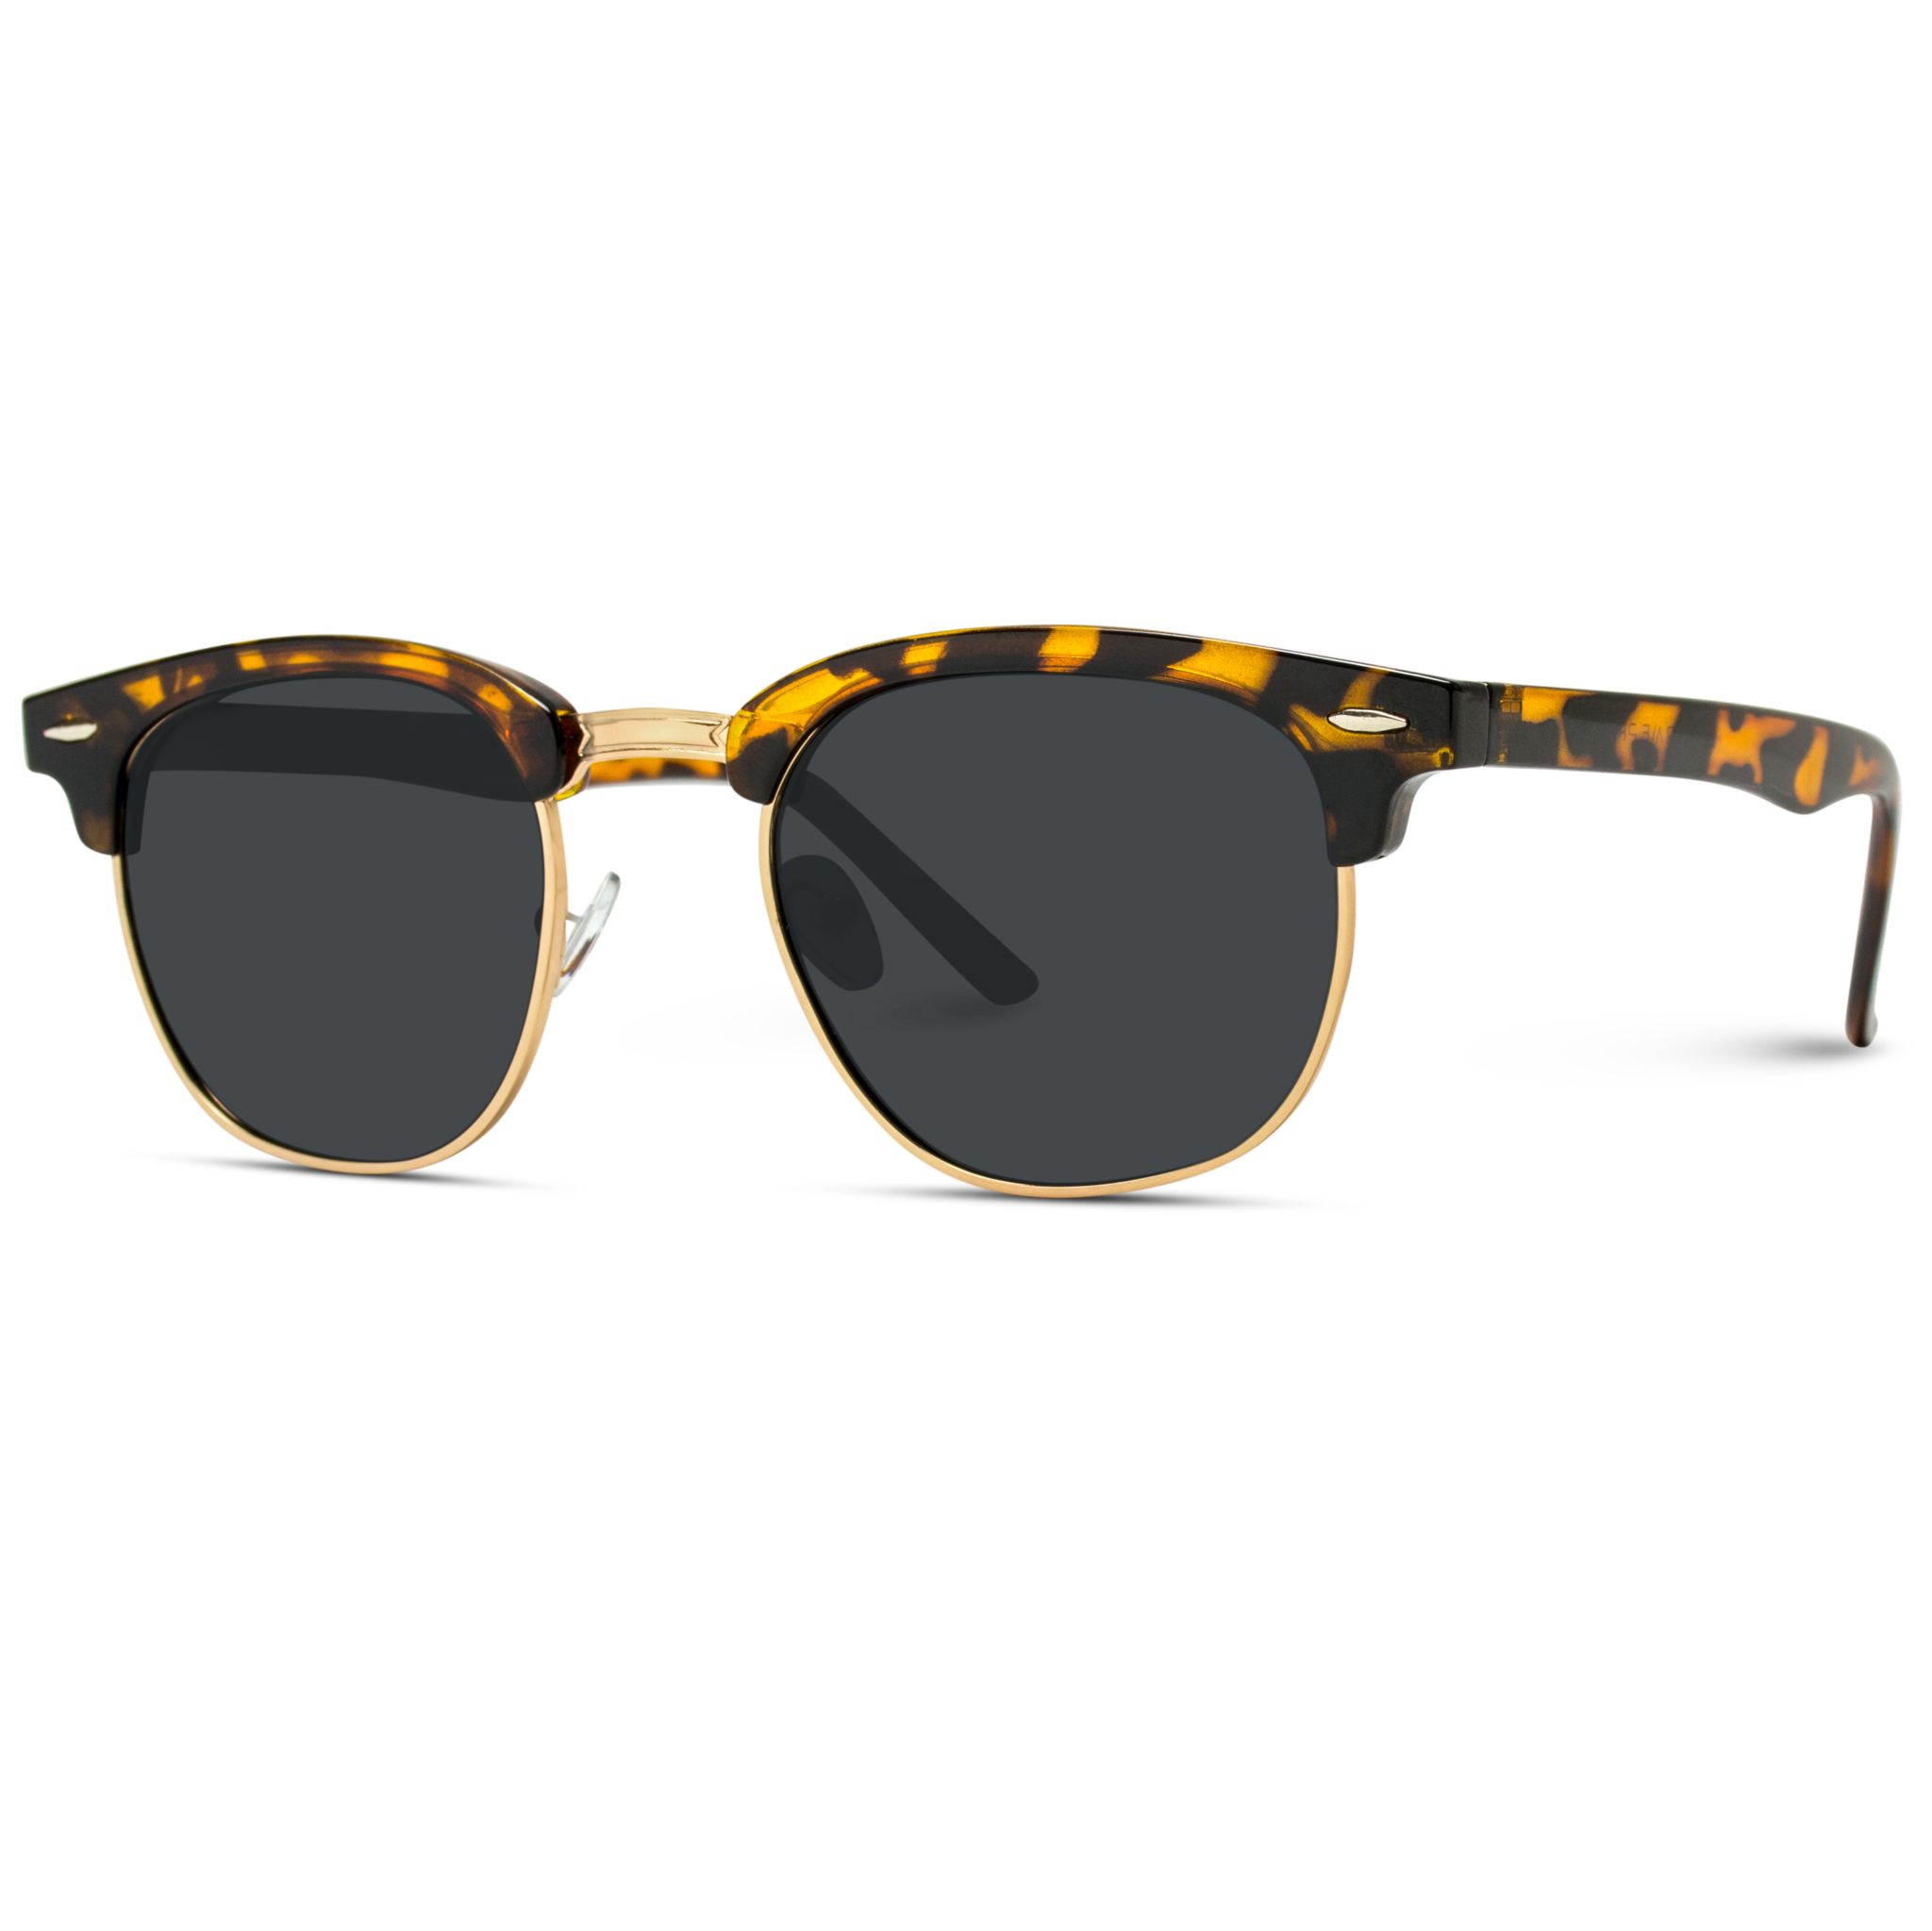 Classic Sunglasses Background PNG Image